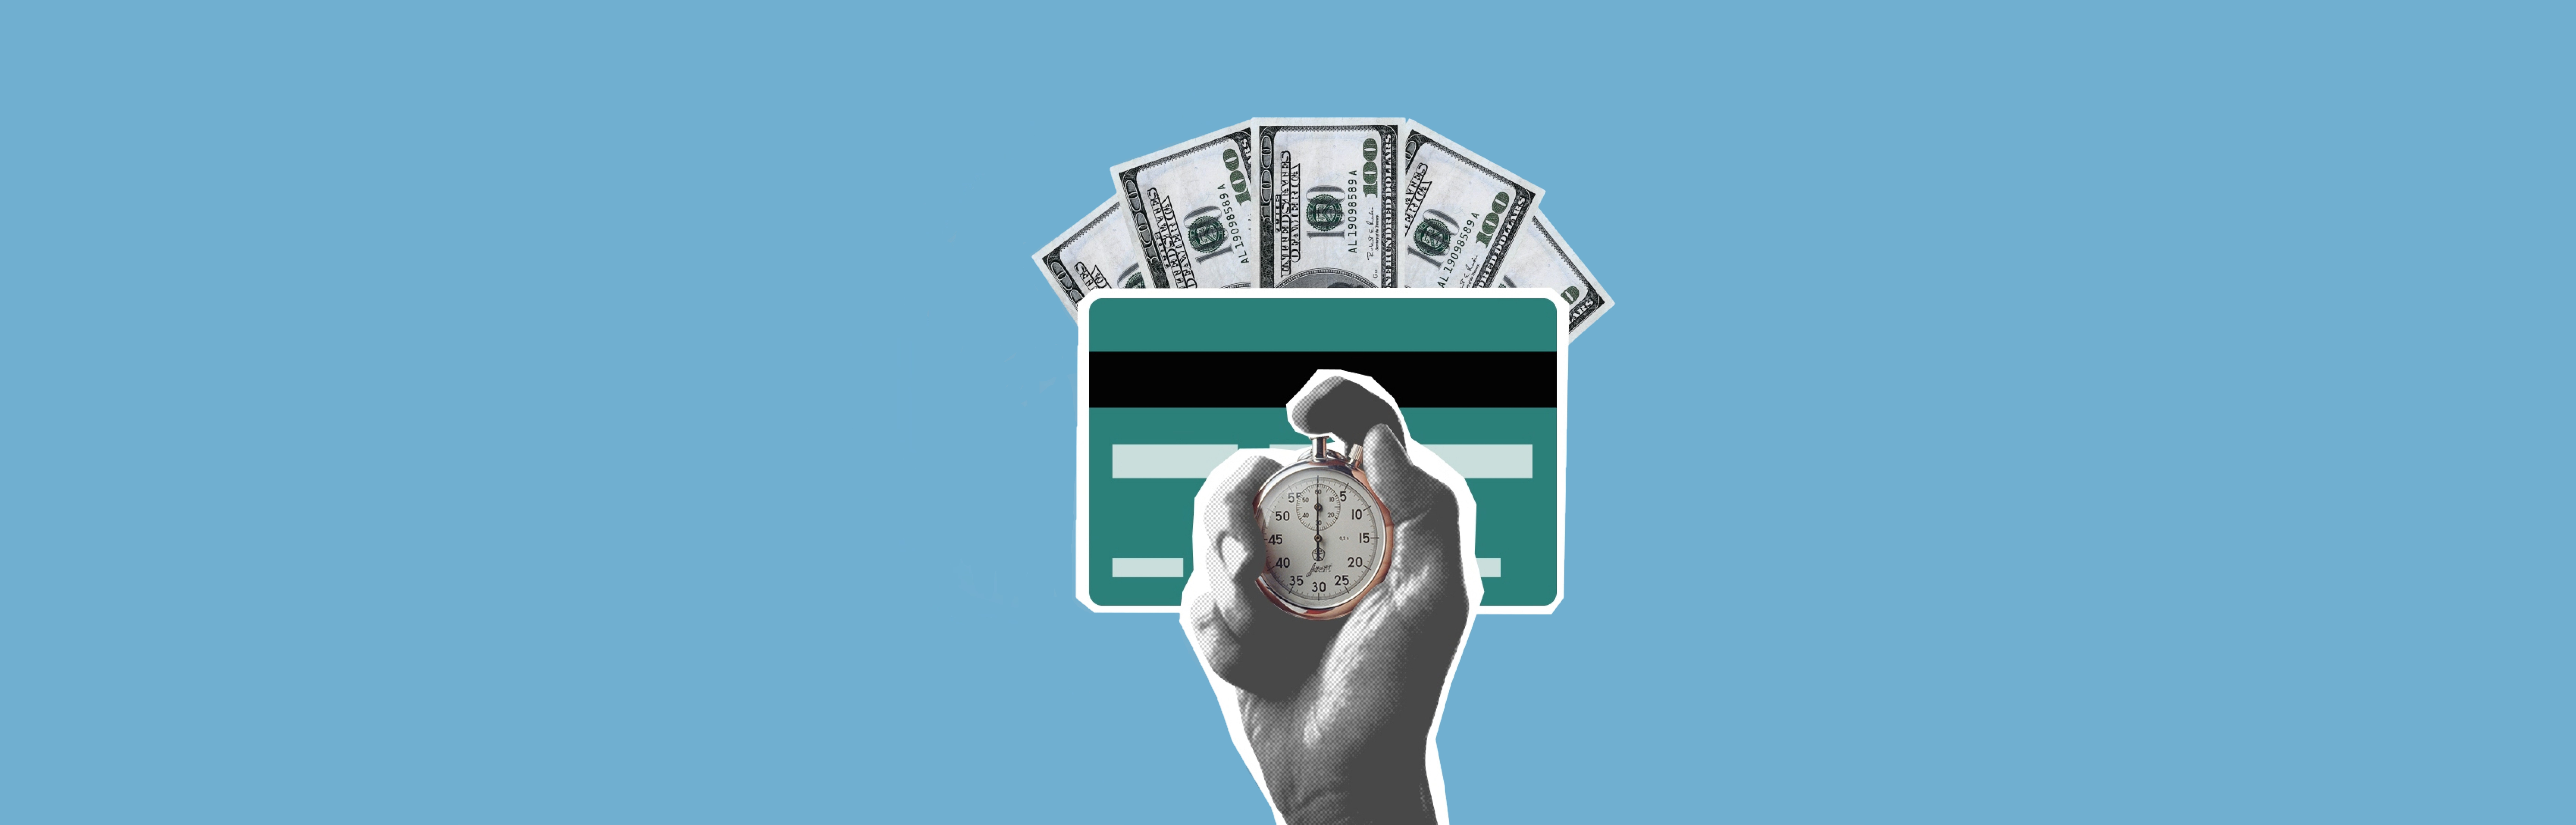 blue background with U.S. dollars, credit card, and hand holding stopwatch